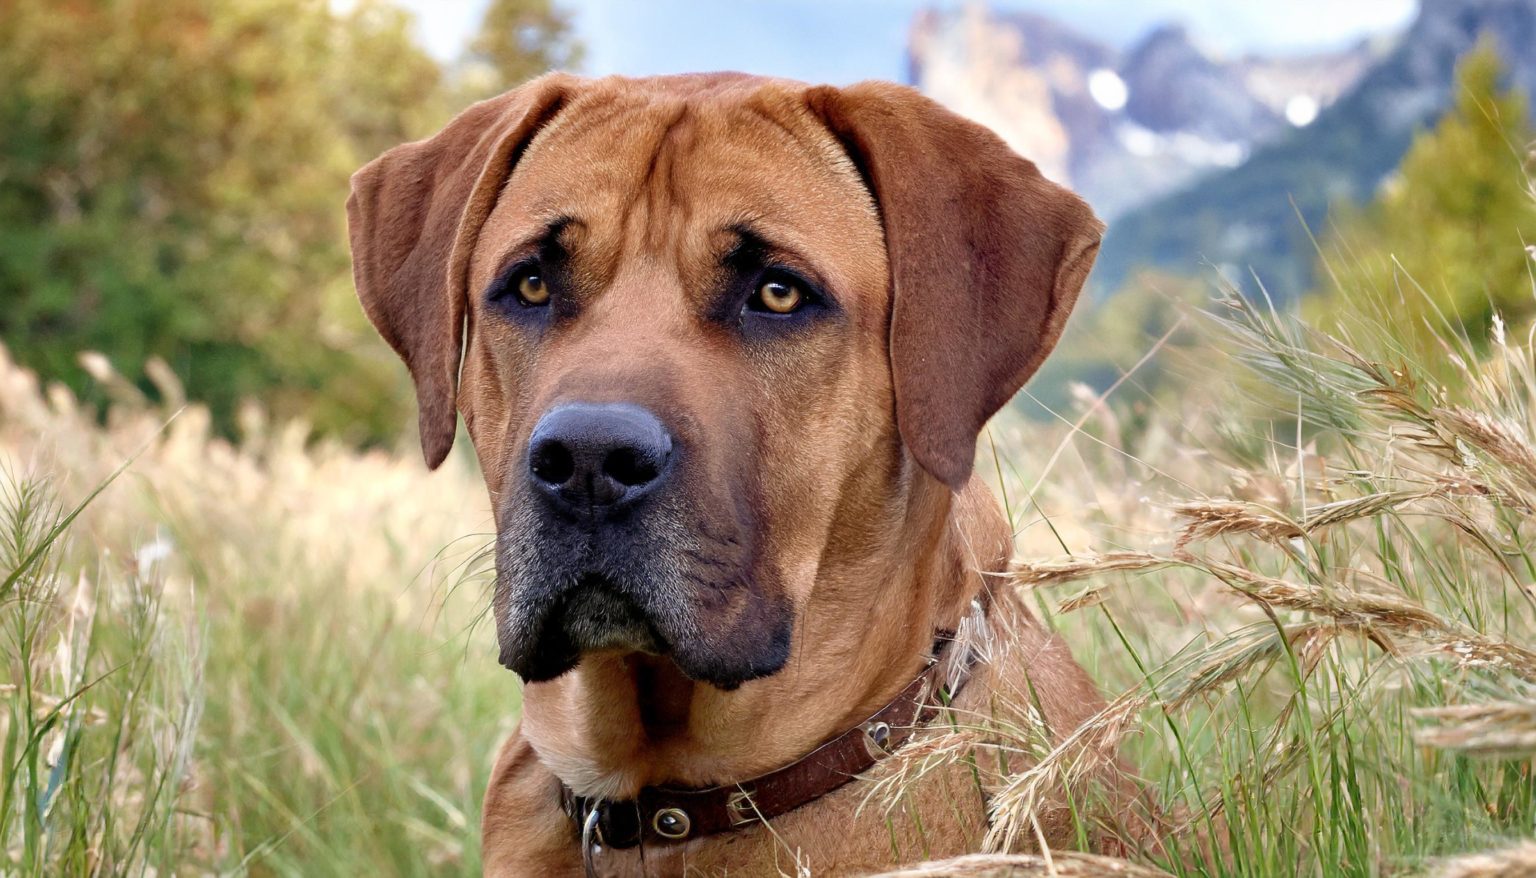 Calm, good-natured, yet watchful and confident, the Broholmer hails from Denmark and makes a great family companion. A large, mastiff-type dog, the Broholmer is rectangular and strongly built with a wide, massive head.